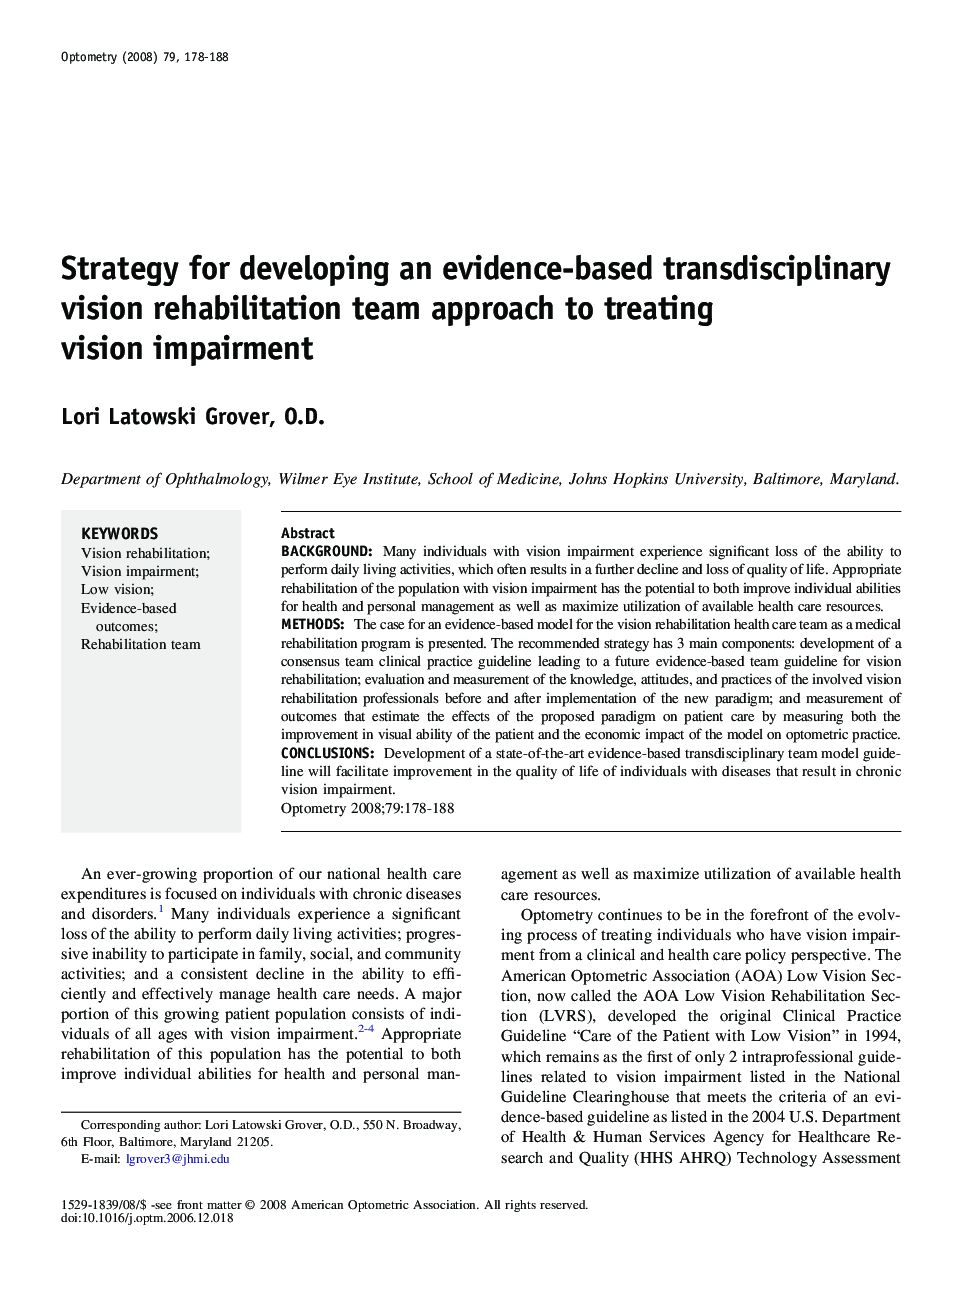 Strategy for developing an evidence-based transdisciplinary vision rehabilitation team approach to treating vision impairment